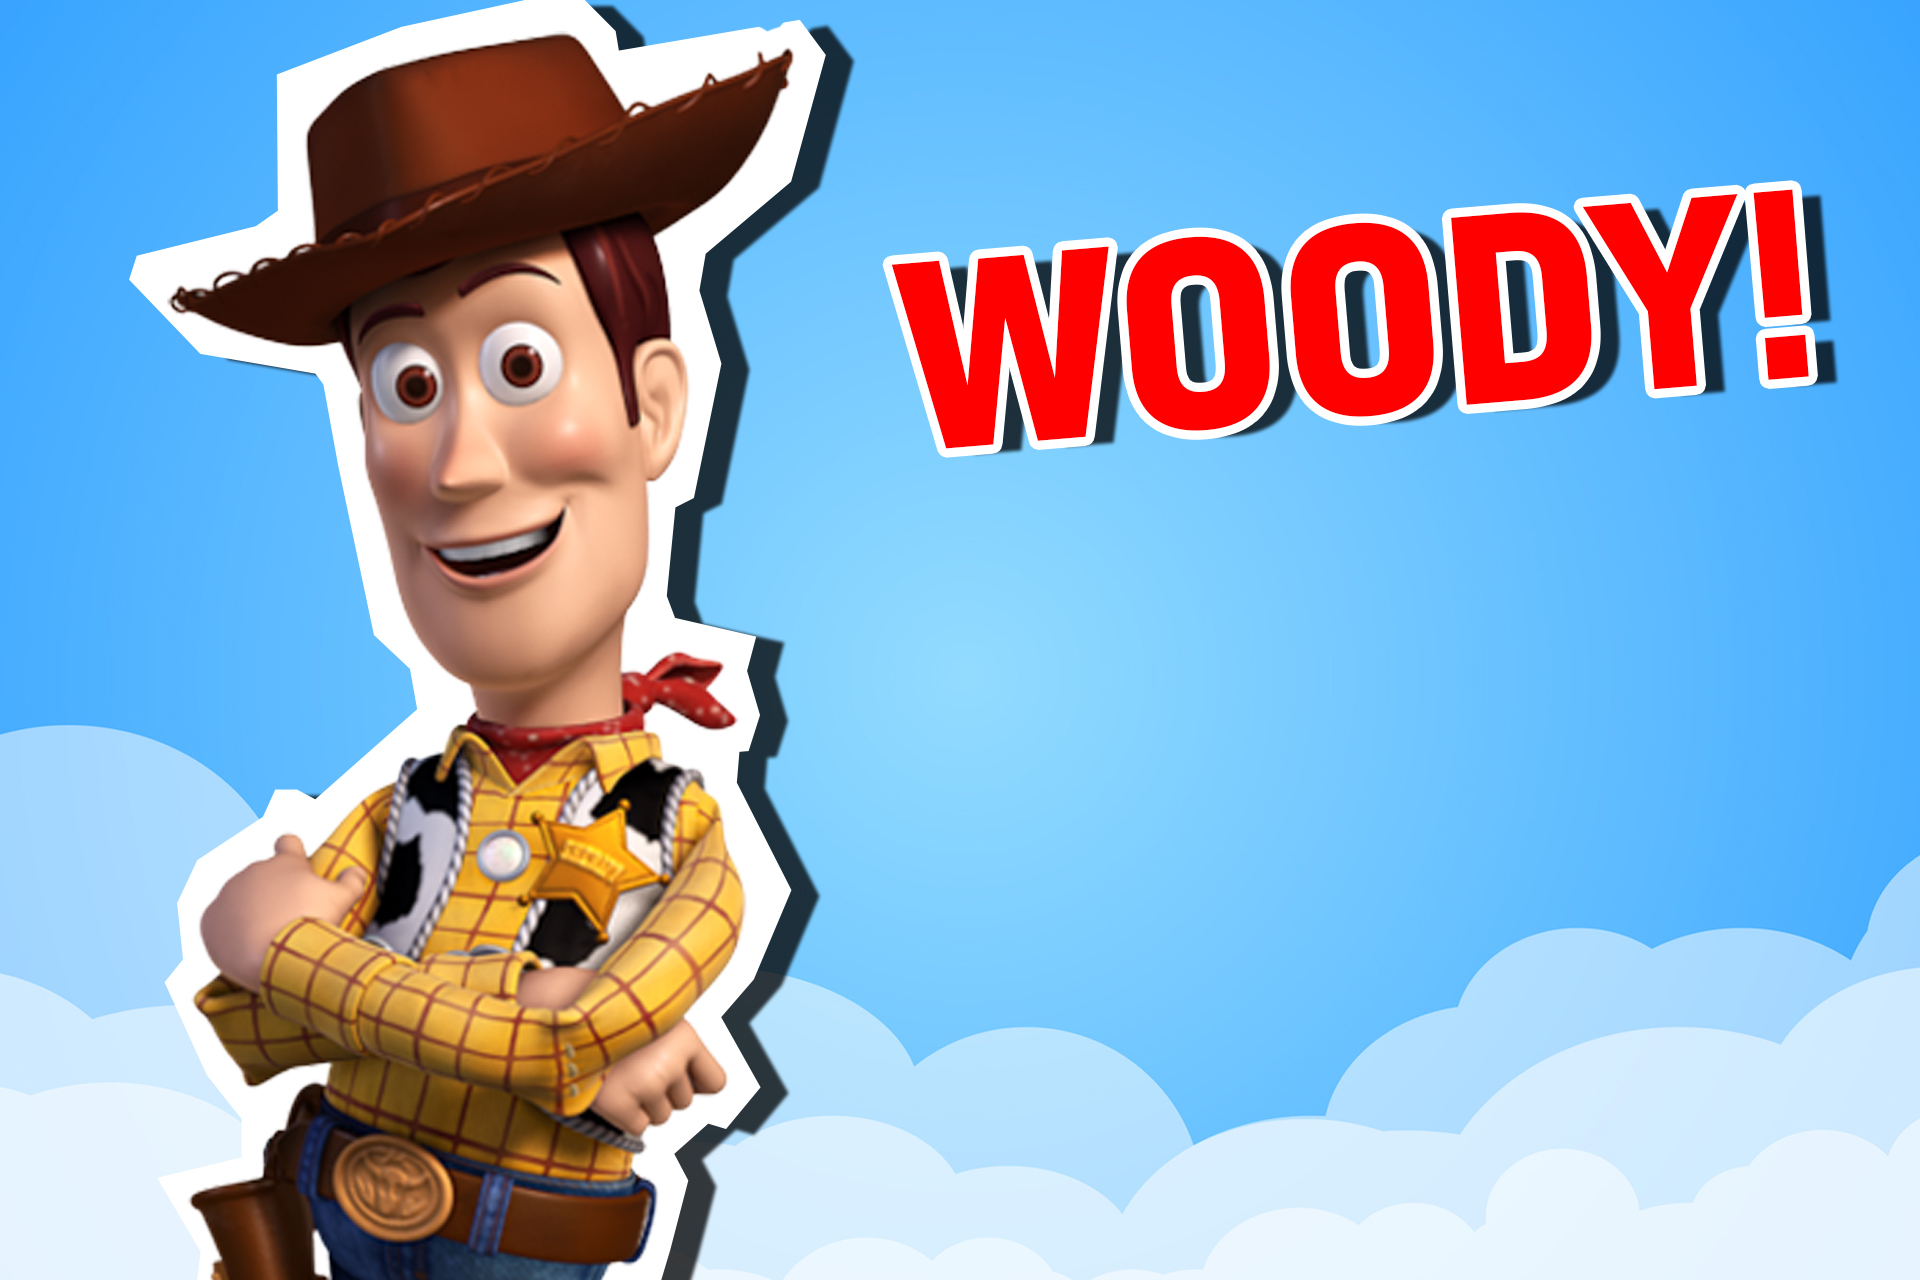 Sherriff Woody Pride from Toy Story | Which Toy Story Character Are You?